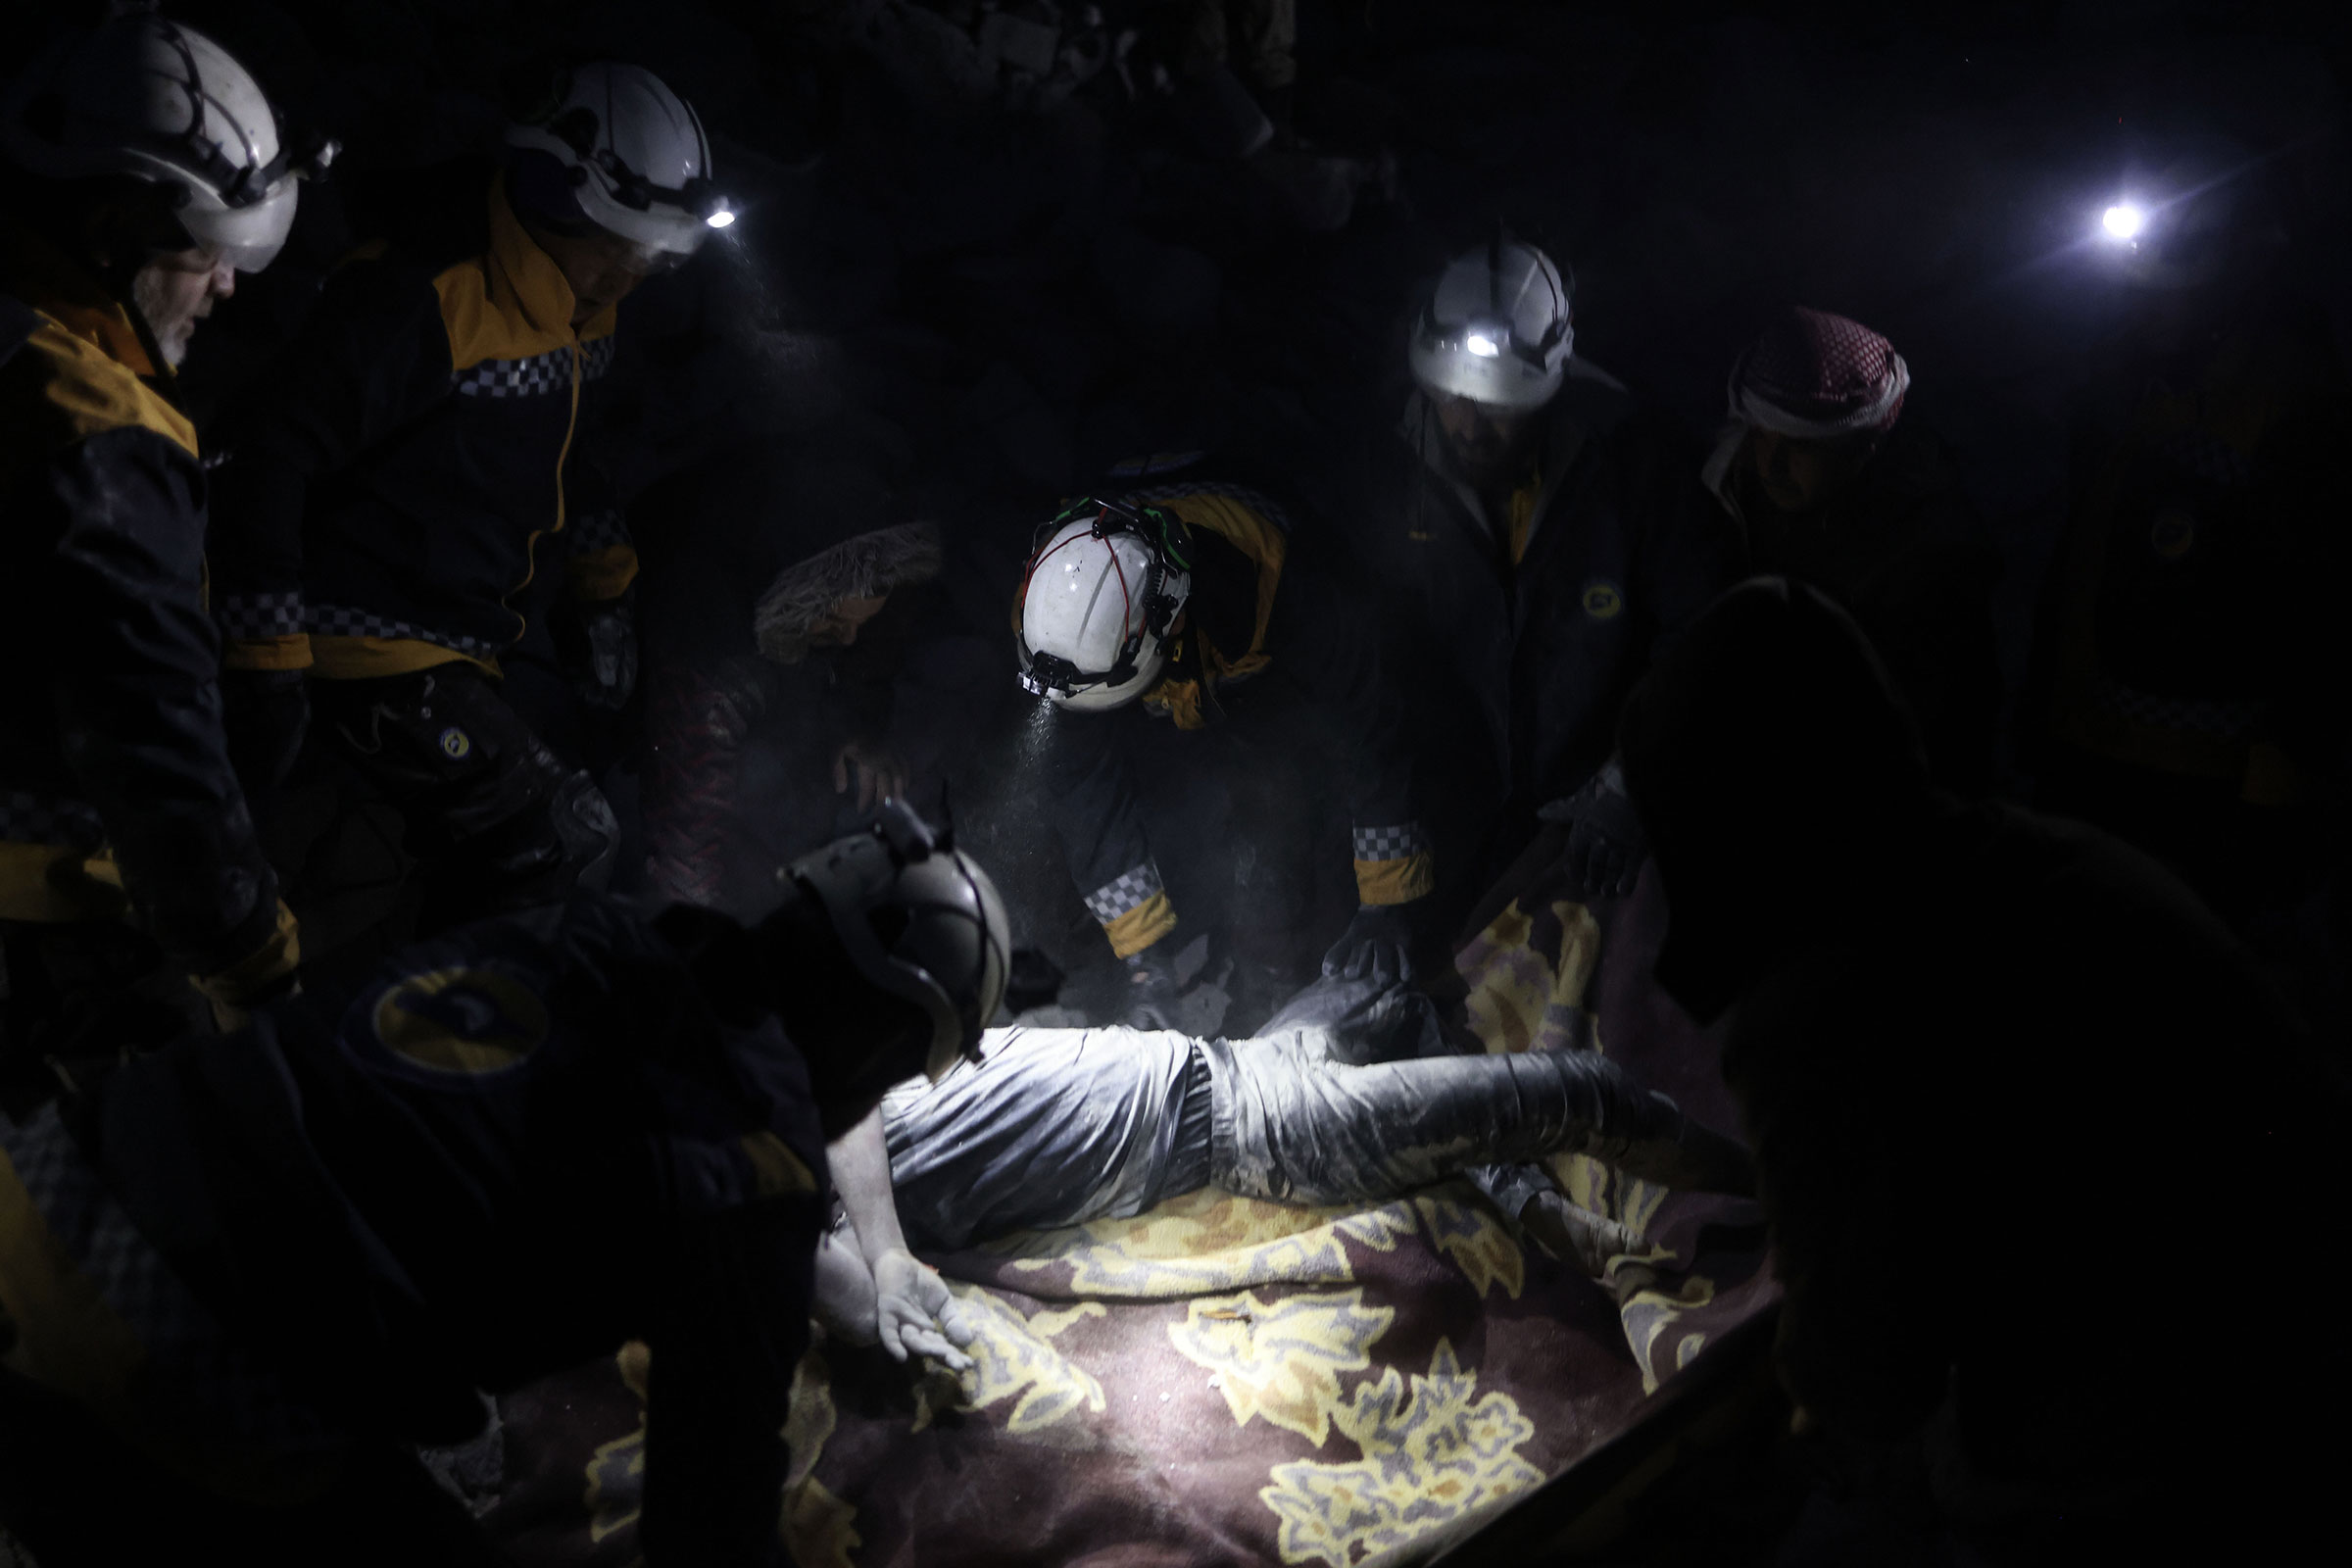 White Helmets members carry the body of a man recovered from under the debris of a collapsed building in the city of Harem following the devastating earthquake that struck the Turkish-Syrian border. (Anas Alkharboutli—picture alliance/Getty Images)